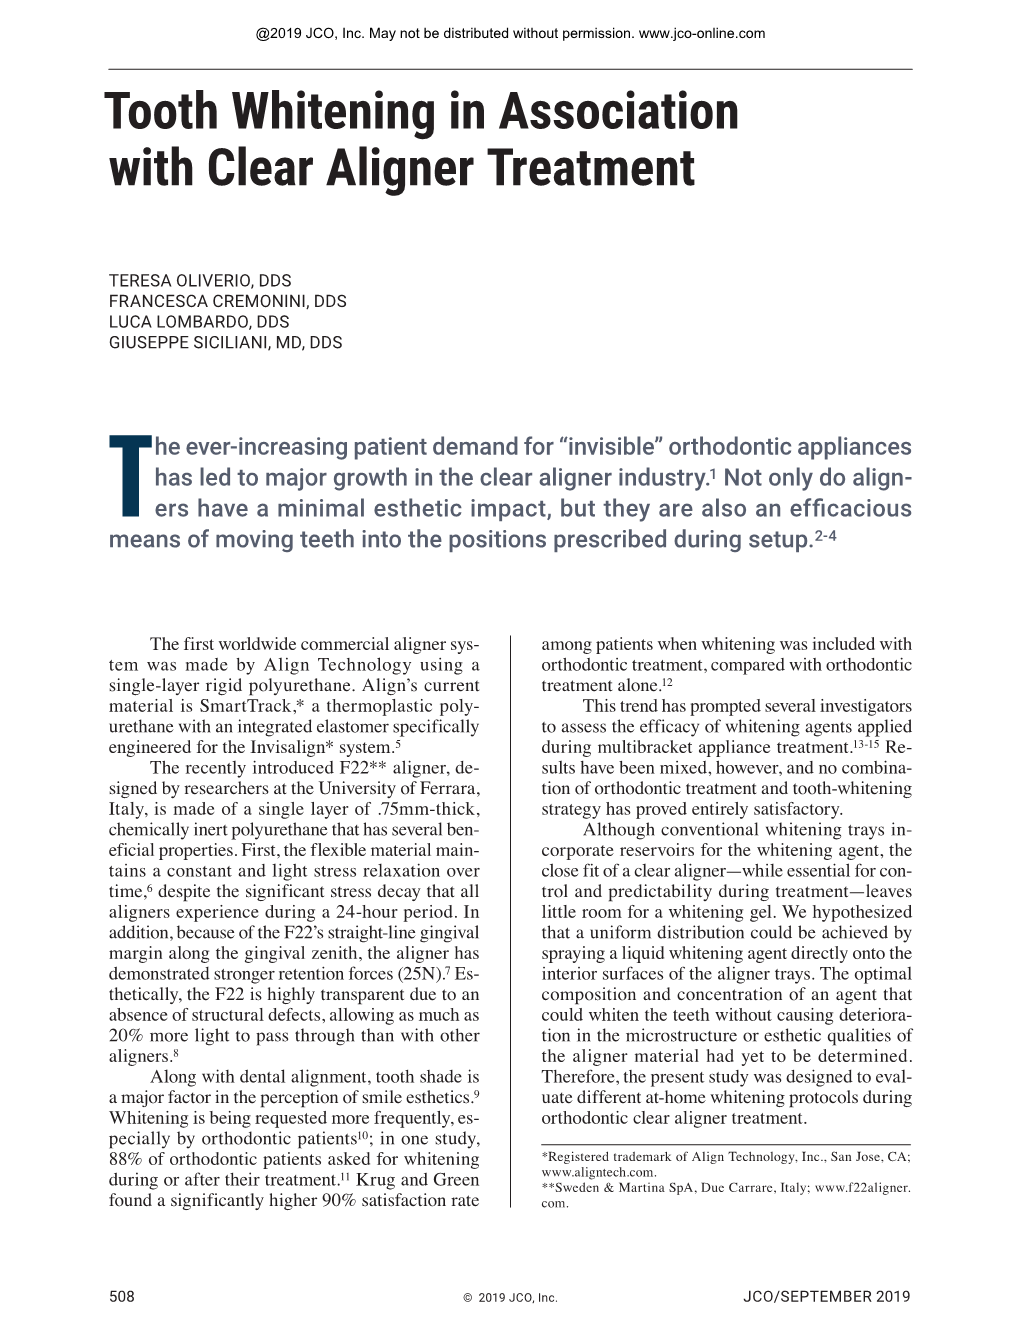 Tooth Whitening in Association with Clear Aligner Treatment